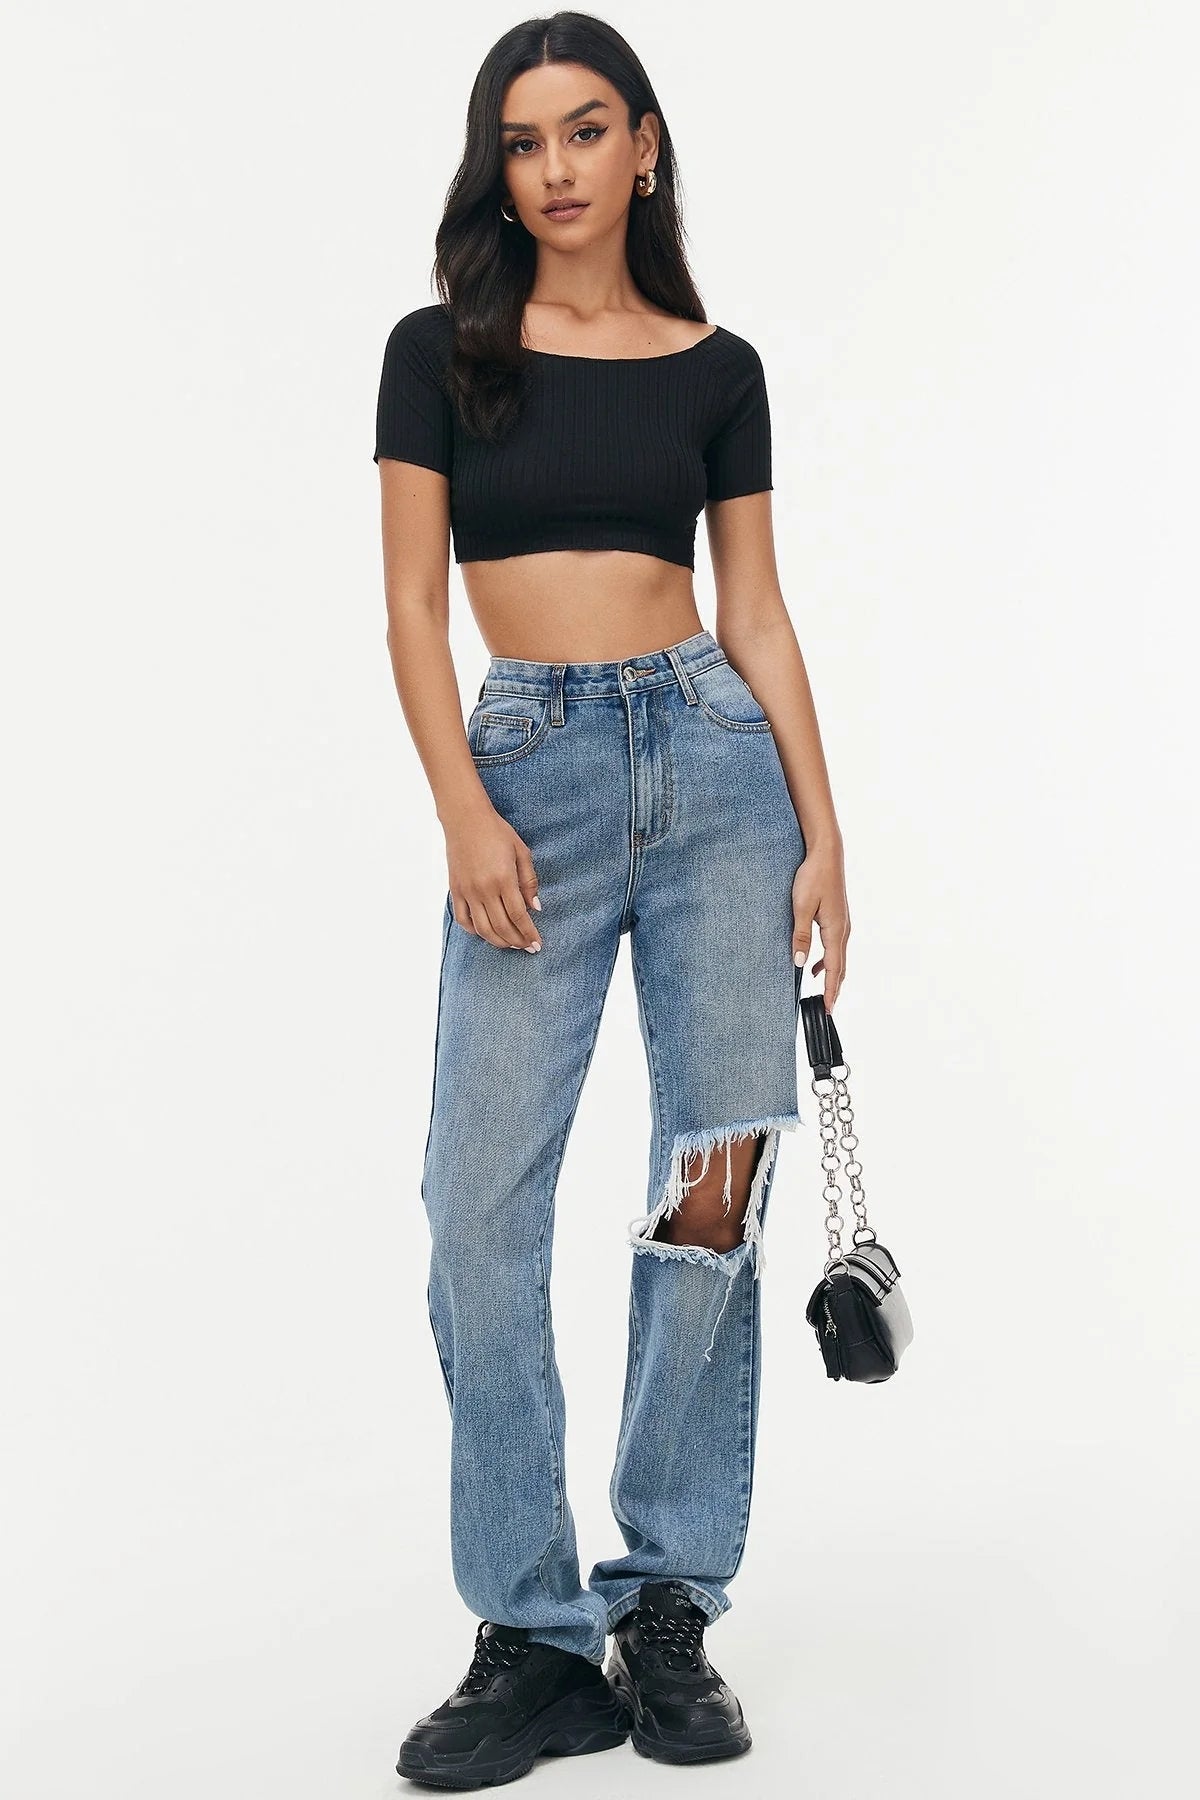 Boat Basic Cropped Top